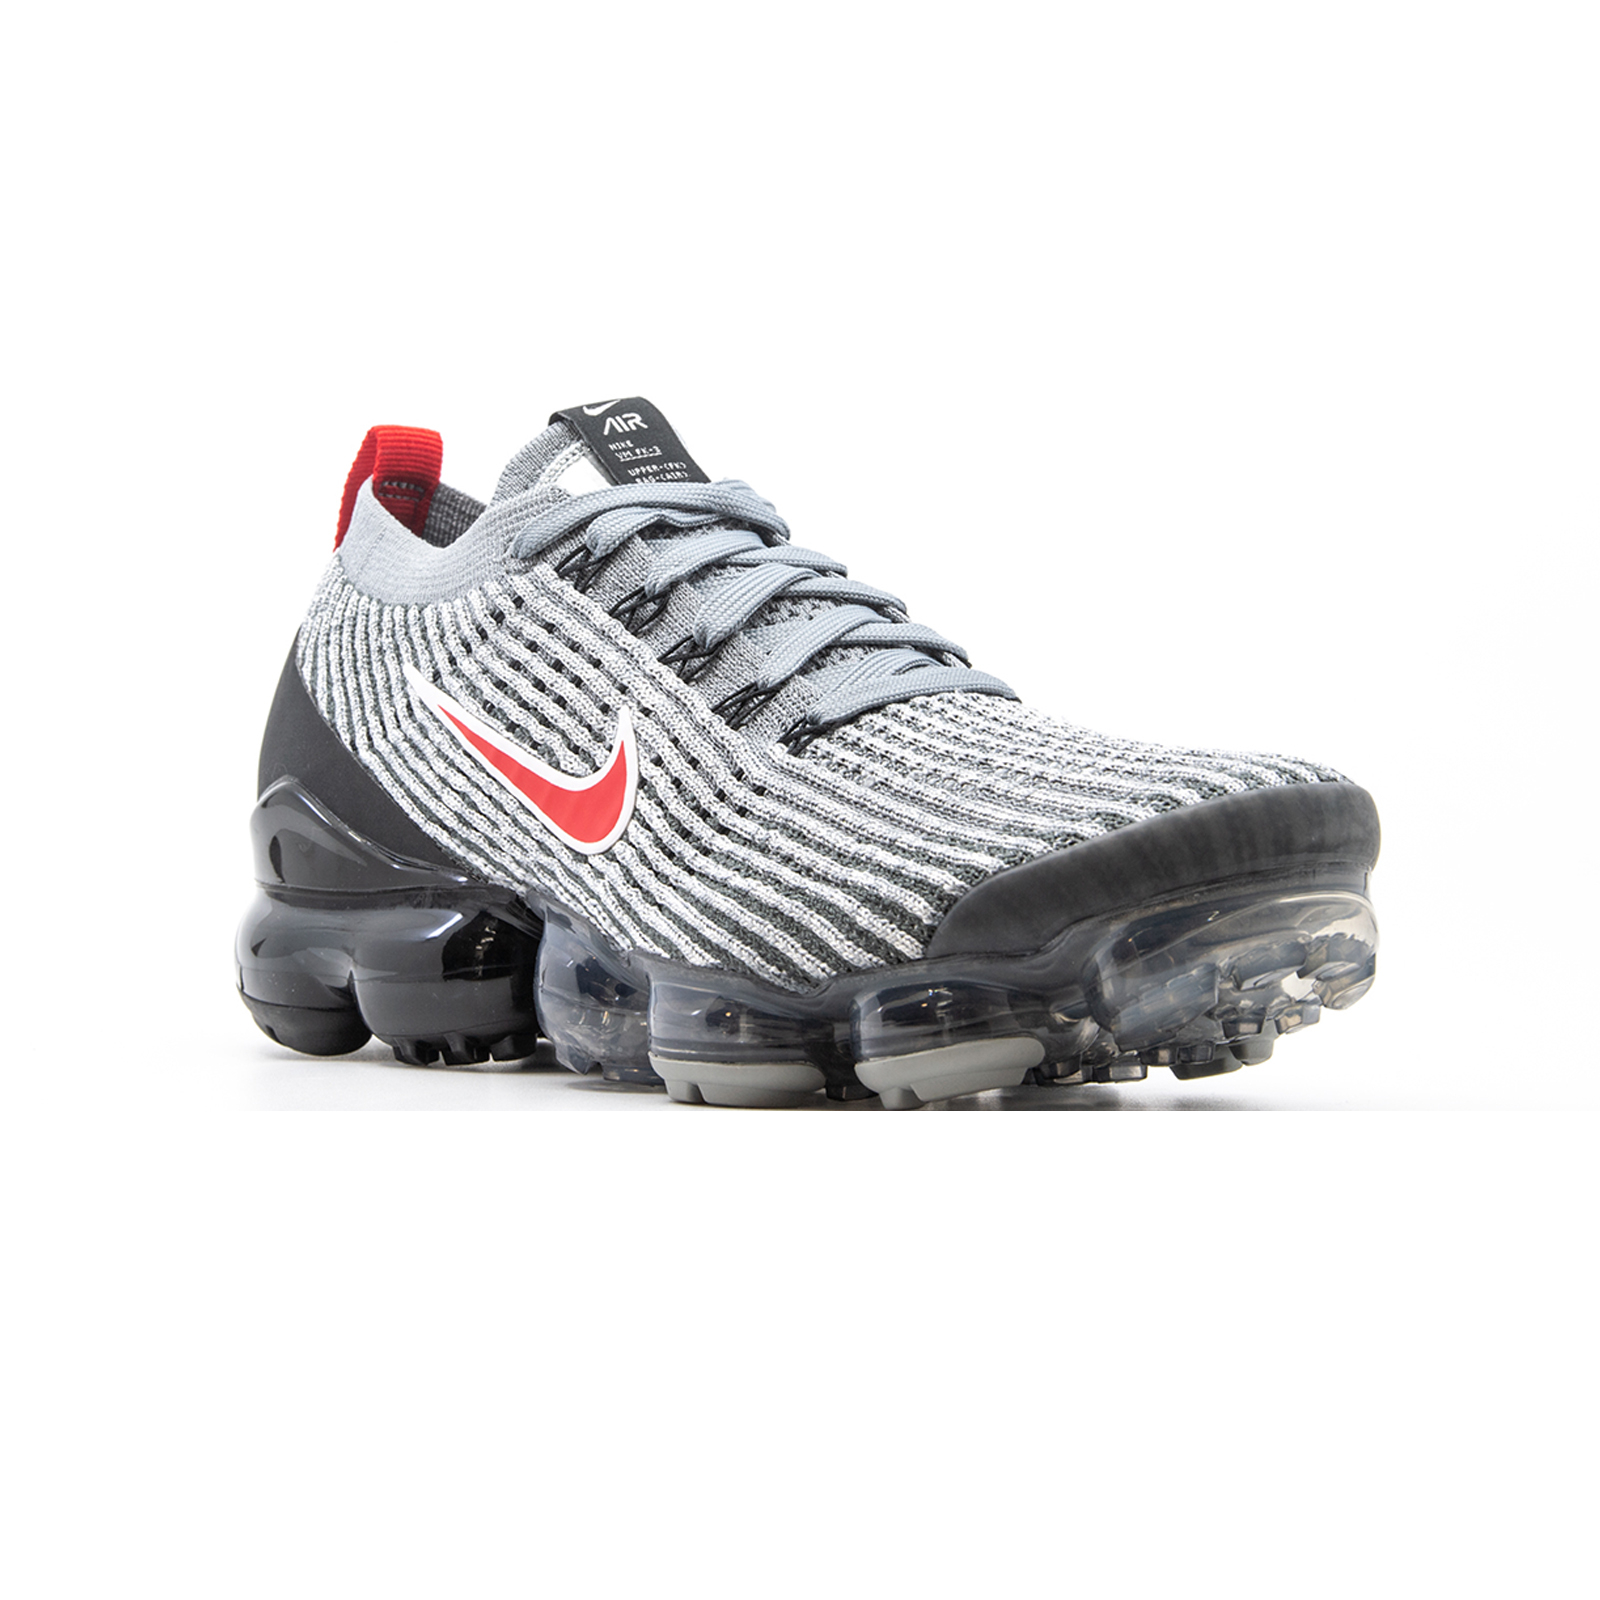 vapormax flyknit 3 particle grey